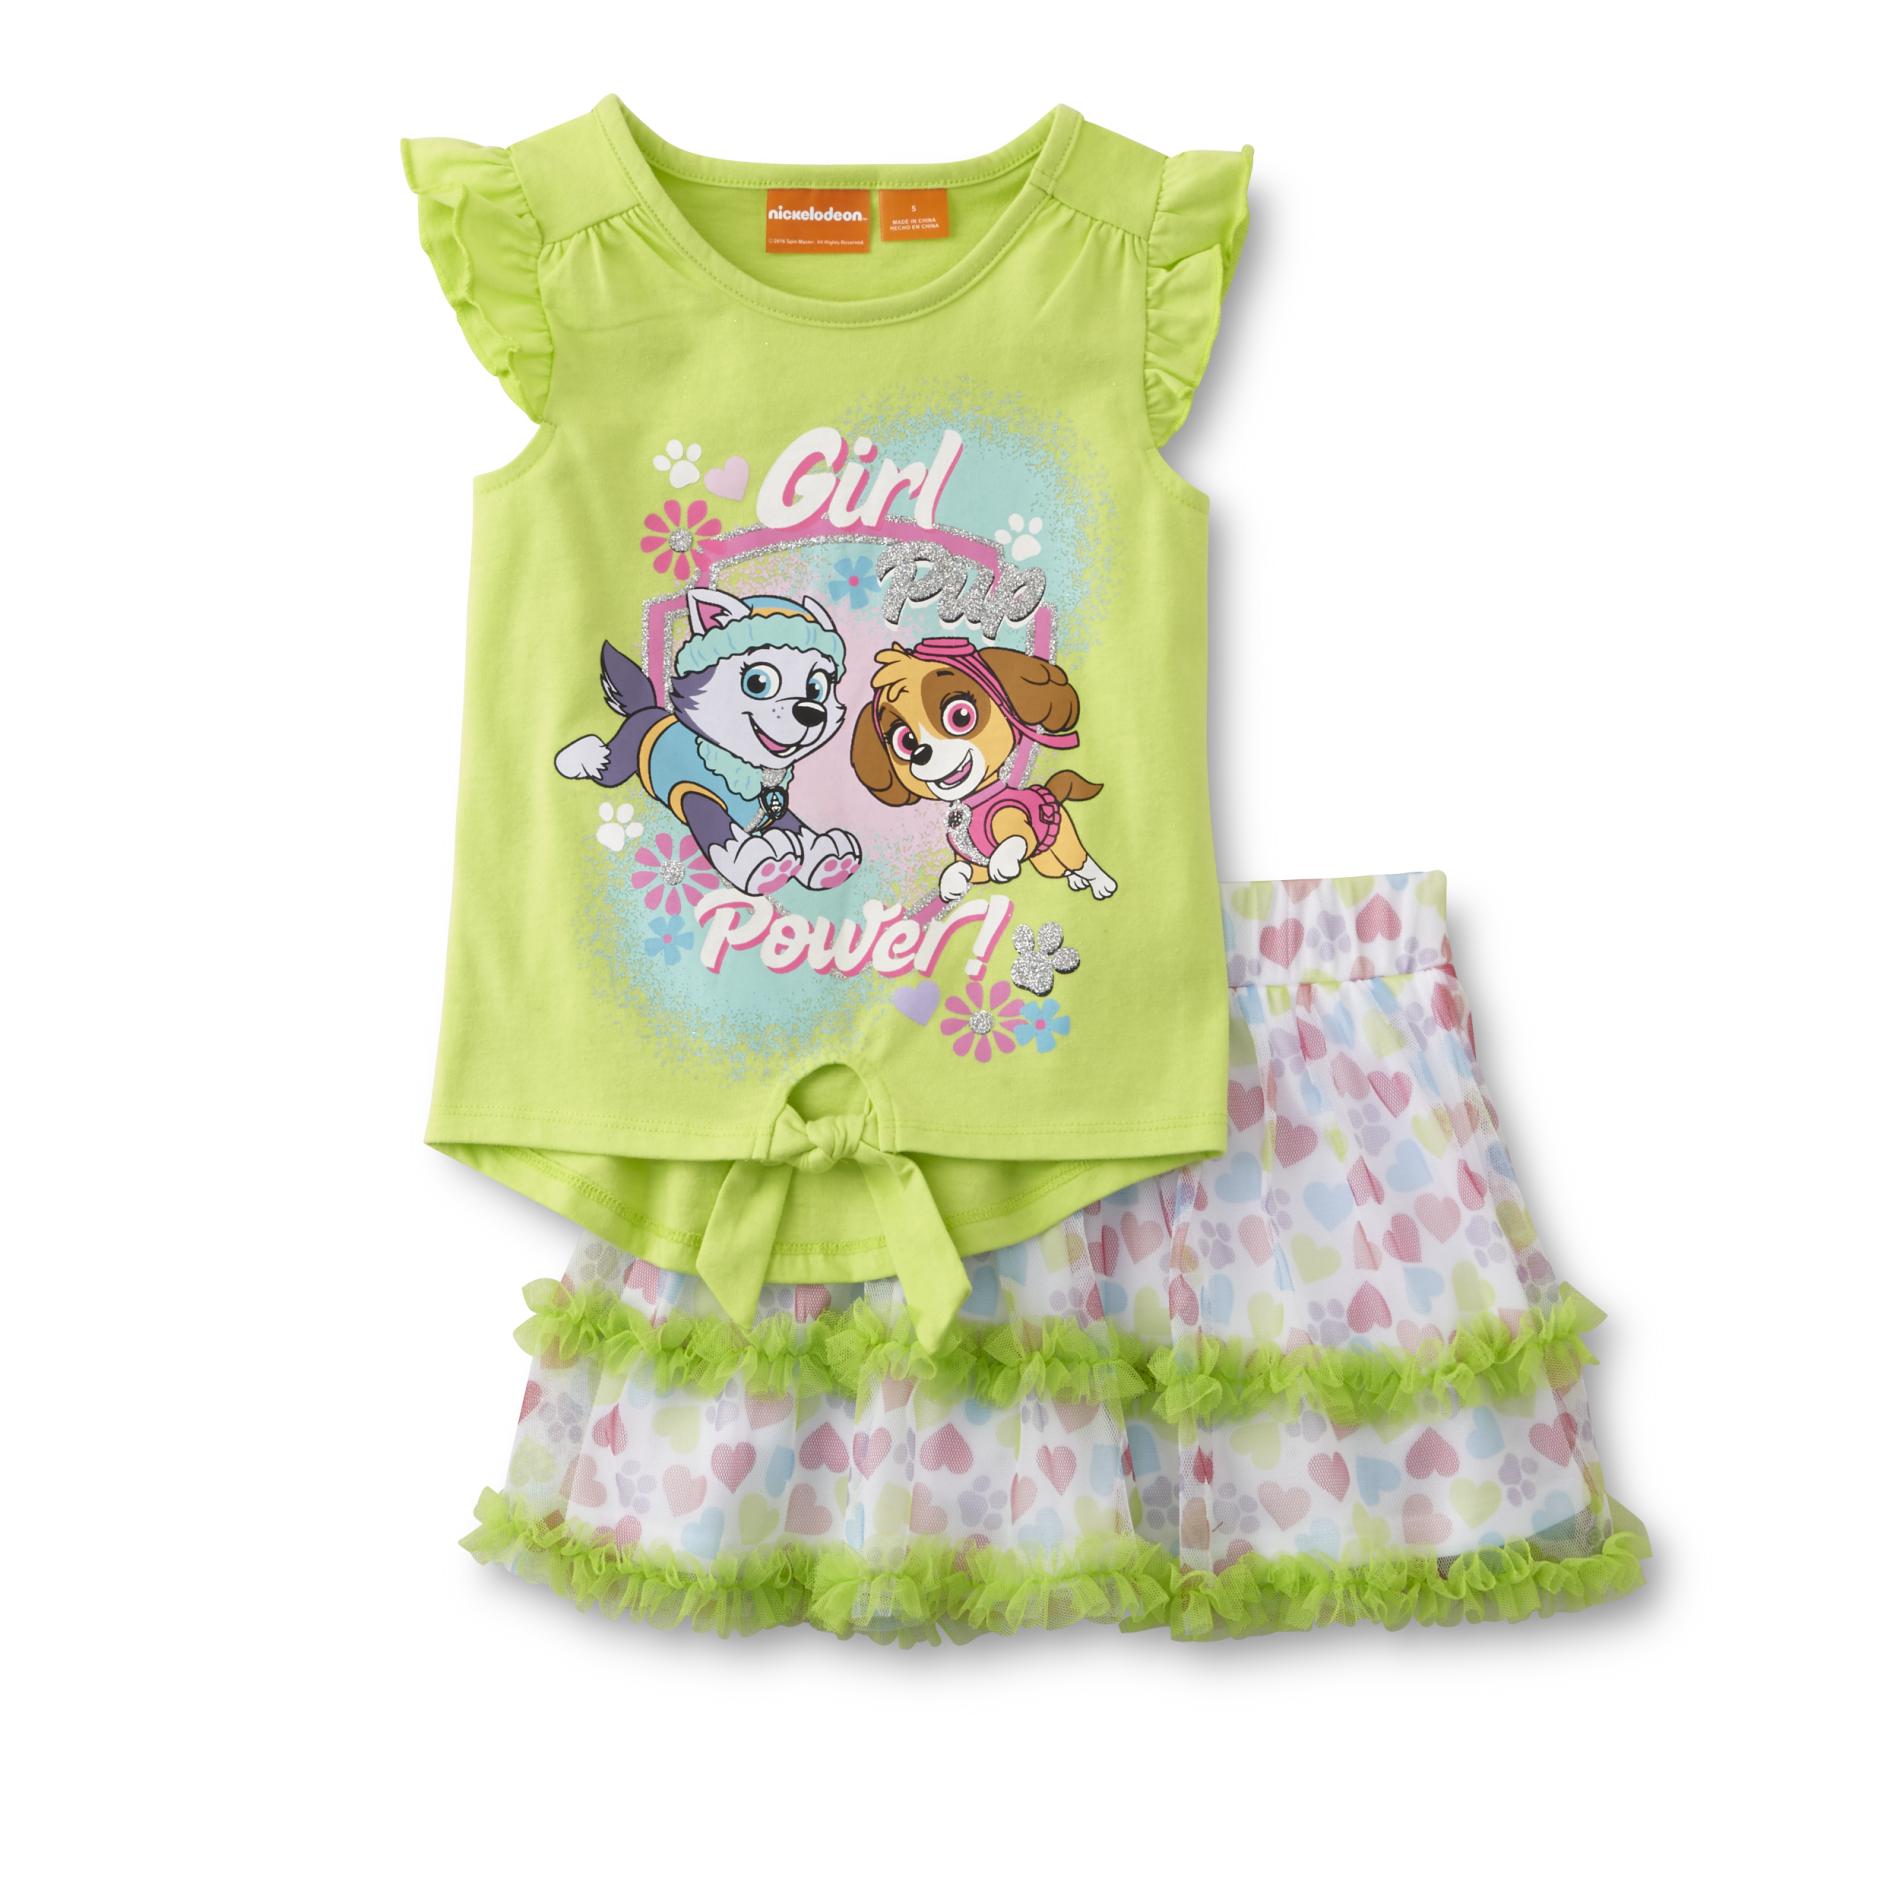 PAW Patrol Girl's Top & Scooter Skirt - Hearts